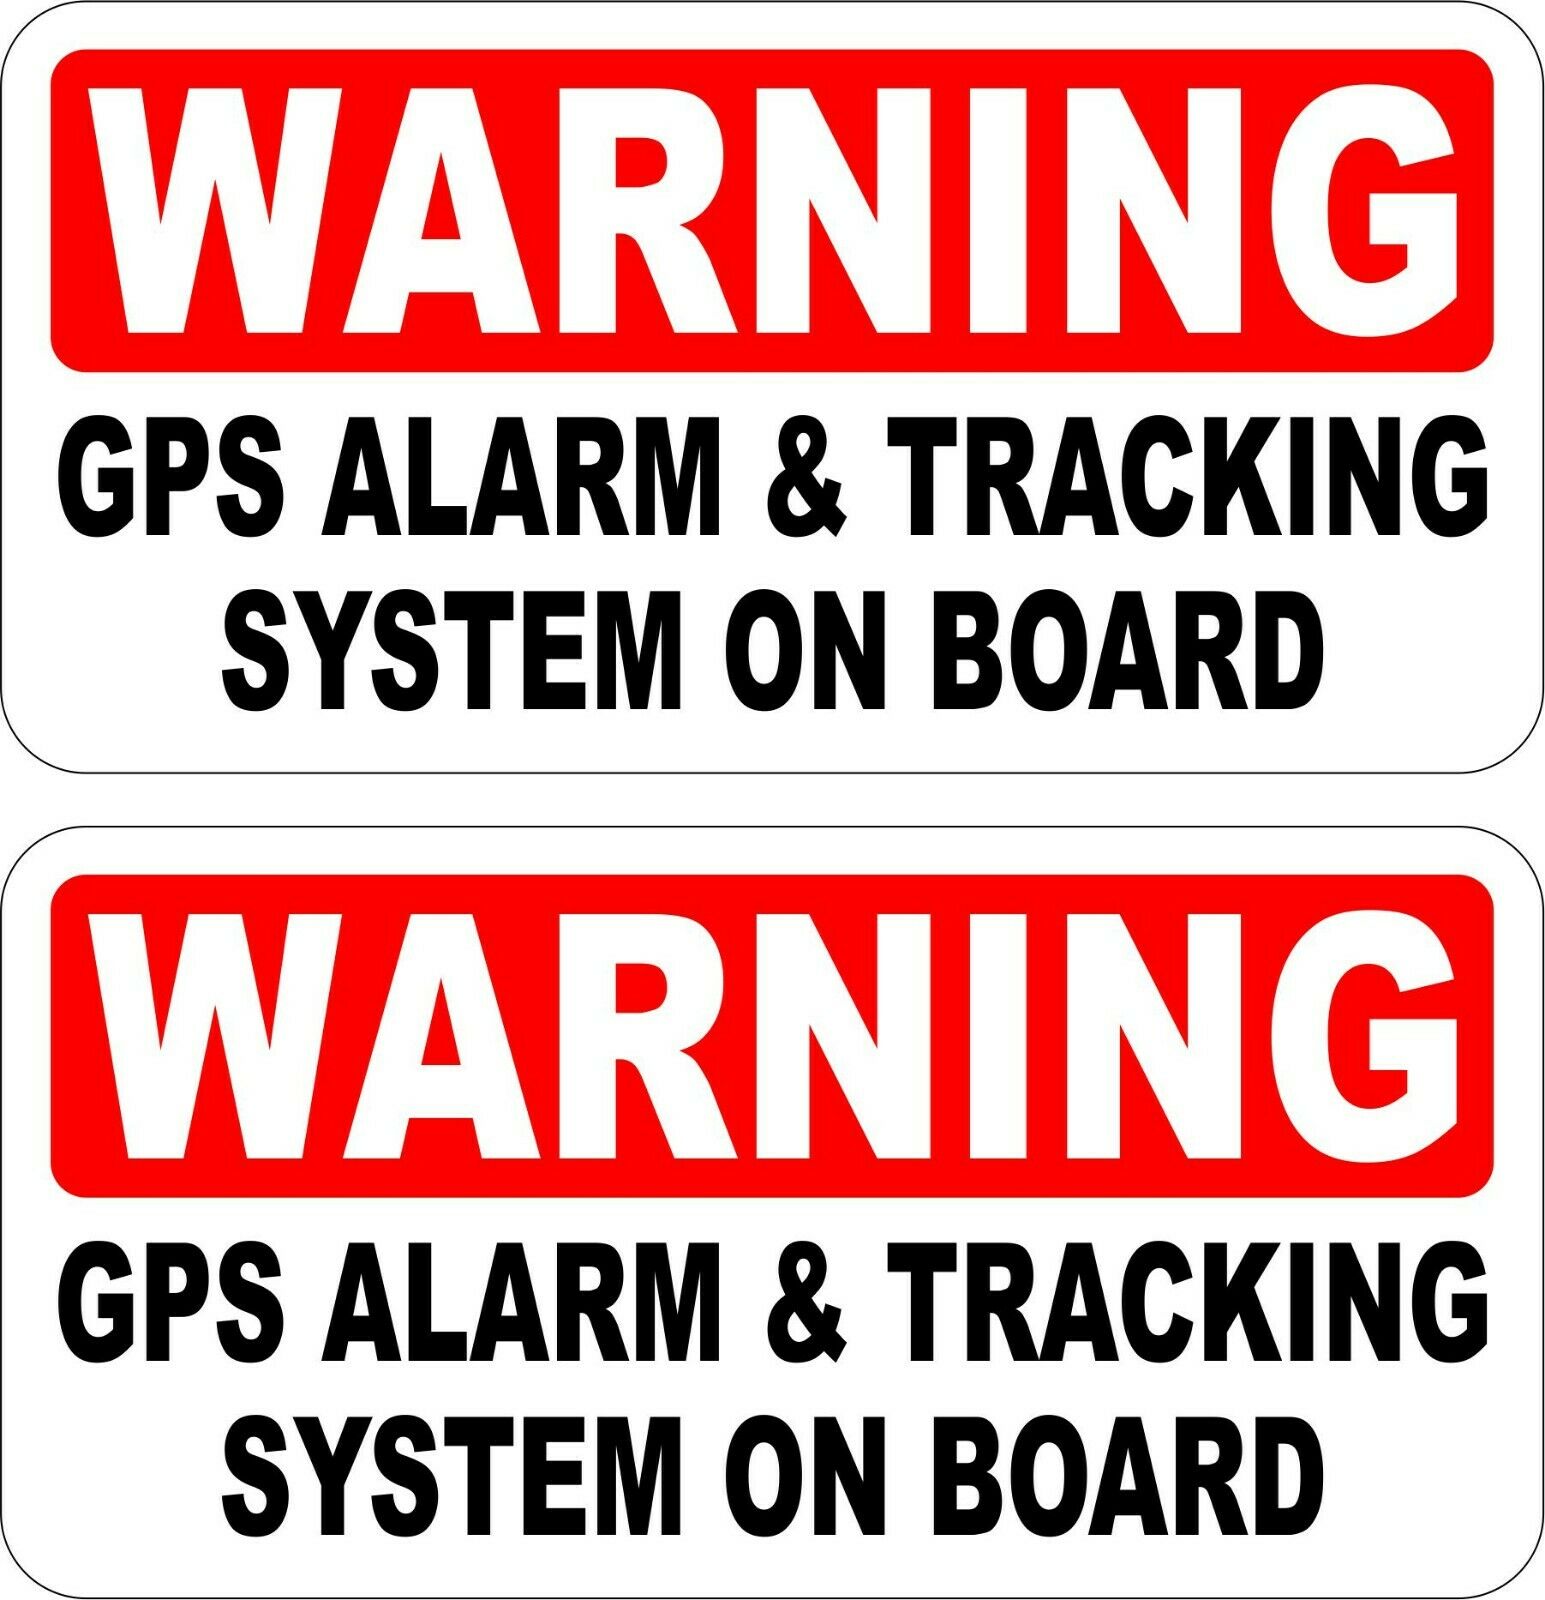 Warning GPS ALARM & TRACKING 6"x3" decals - Security Window - Quantity of 2 - Powercall Sirens LLC